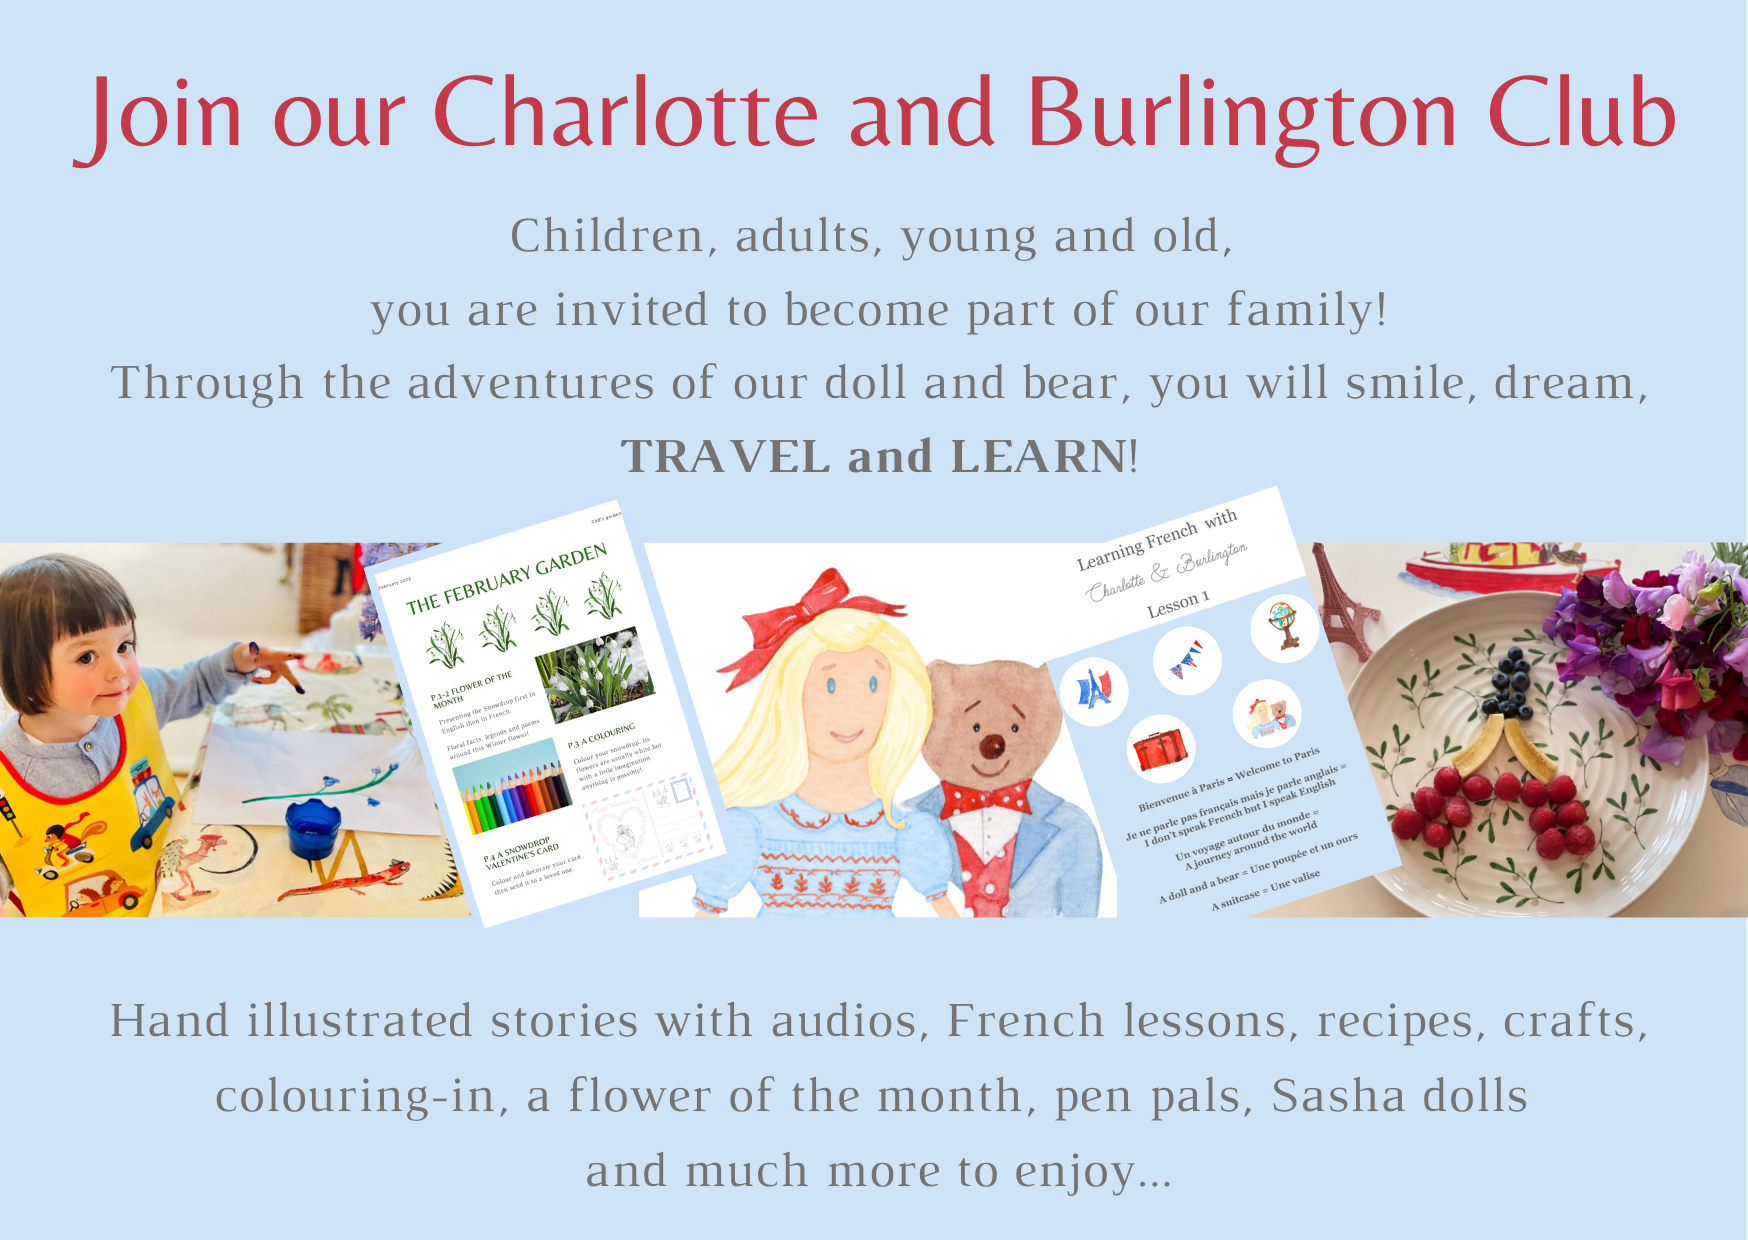 Charlotte and Burlington family friendly club French